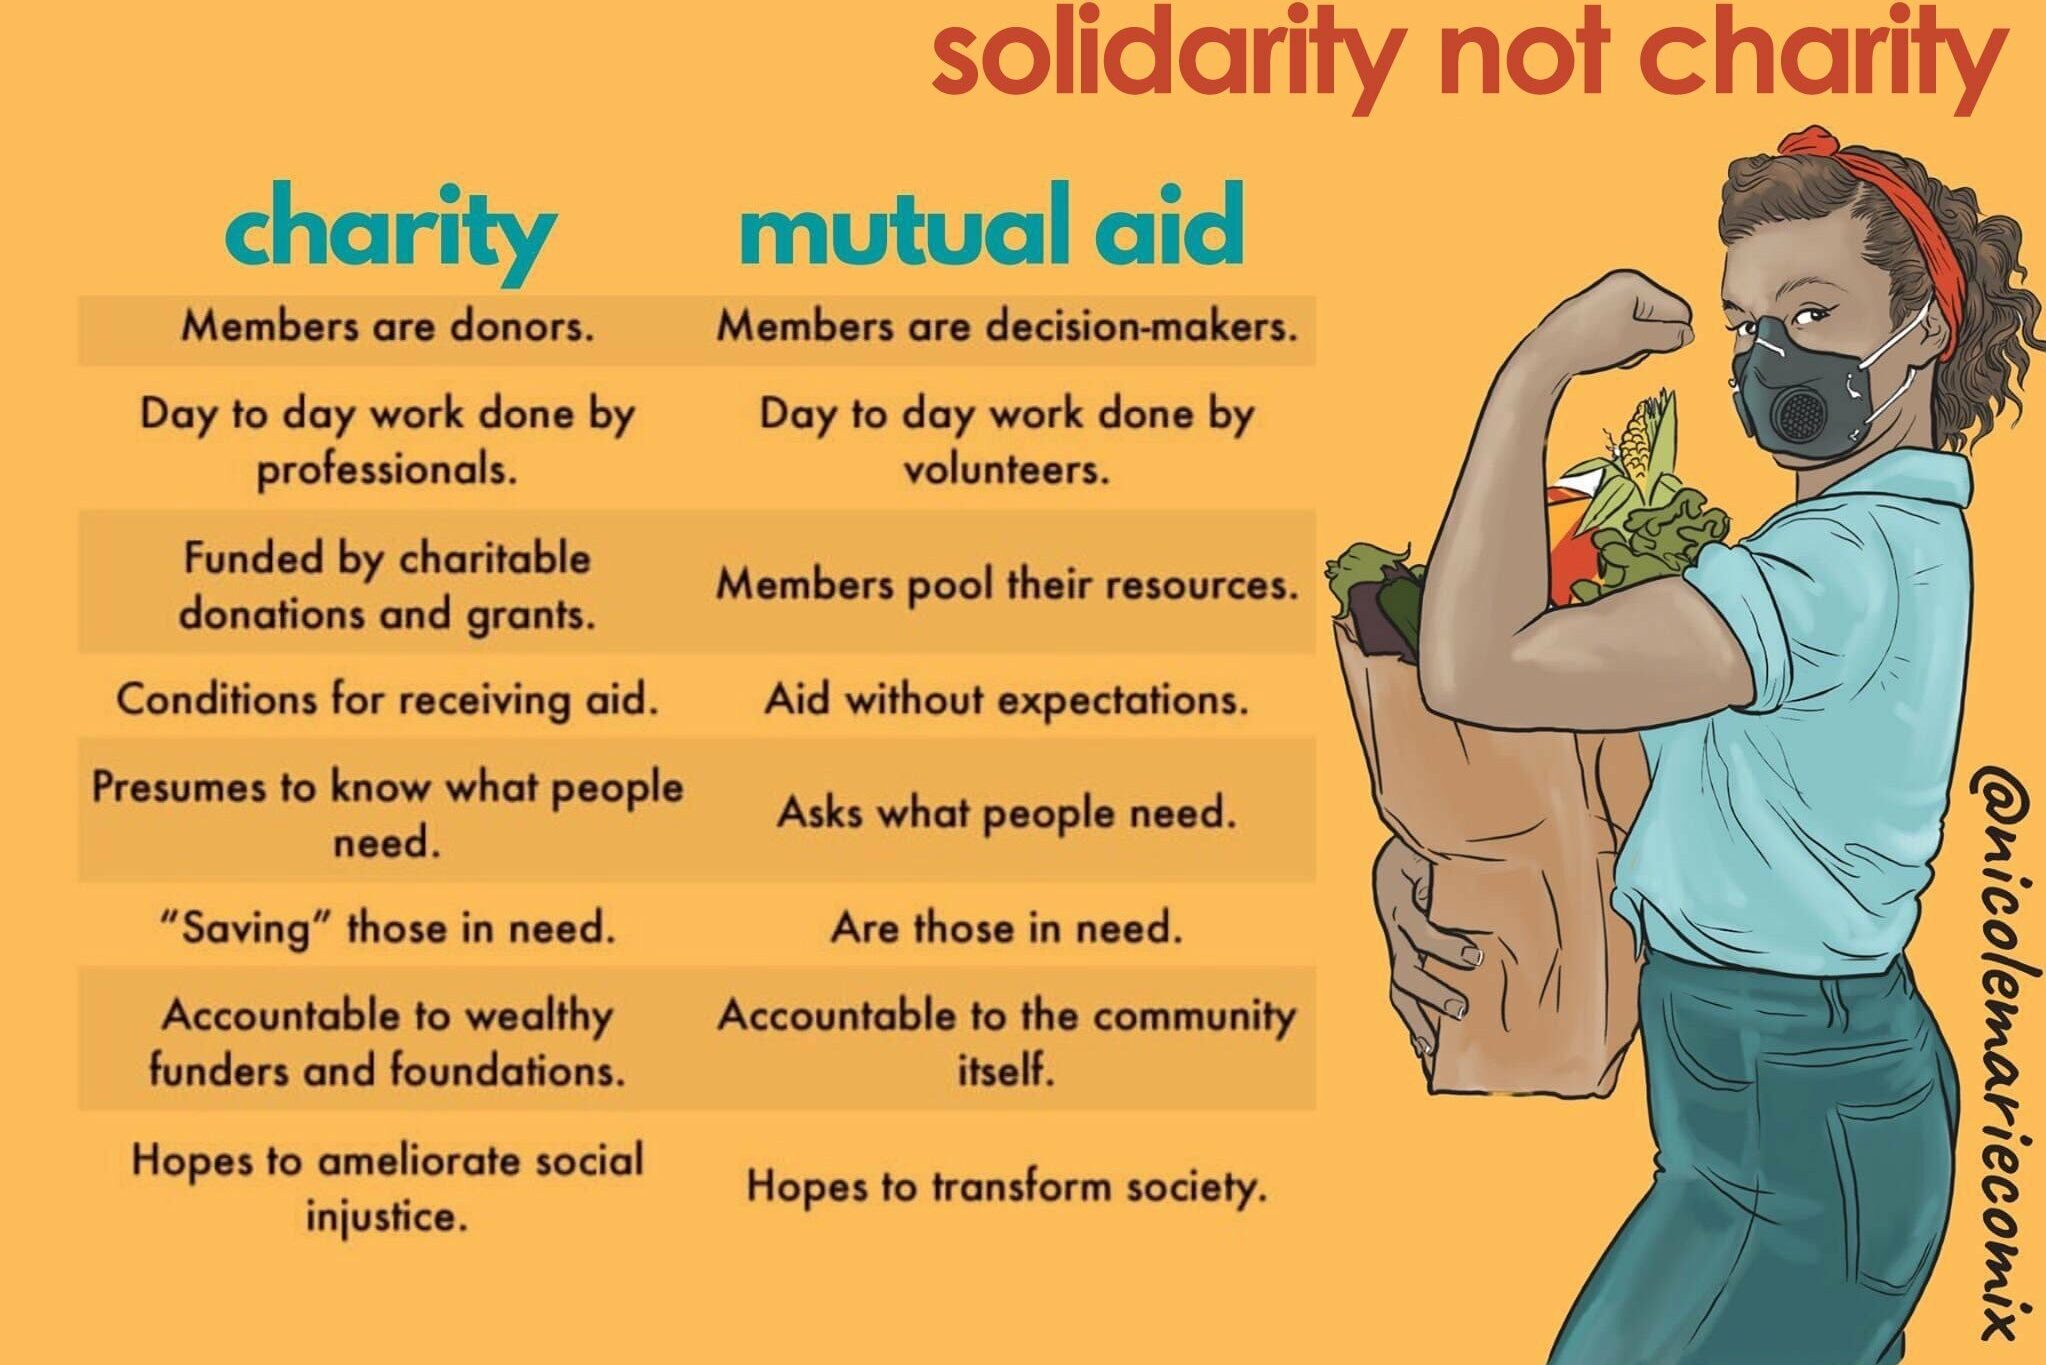 Chart showing difference between charity and mutual aid